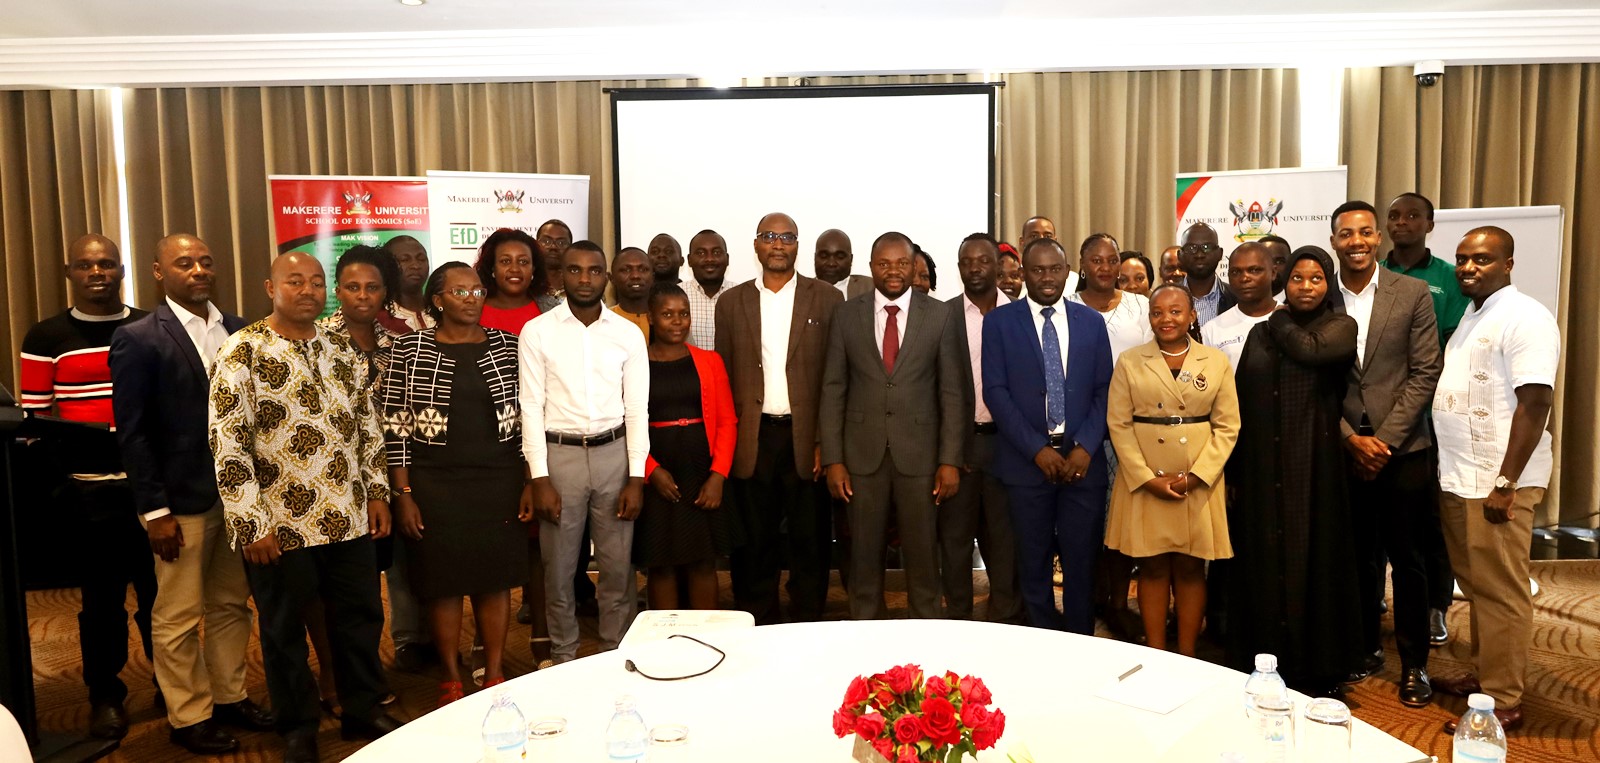 Participants in a group photo after the opening ceremony on 17th November 2023 at the Kampala Sheraton Hotel. Makerere EfD Stakeholders Meeting, Transitioning from Biomass to Clean Energy Sources, 17th November 2023, Kampala Sheraton Hotel, Uganda, East Africa.